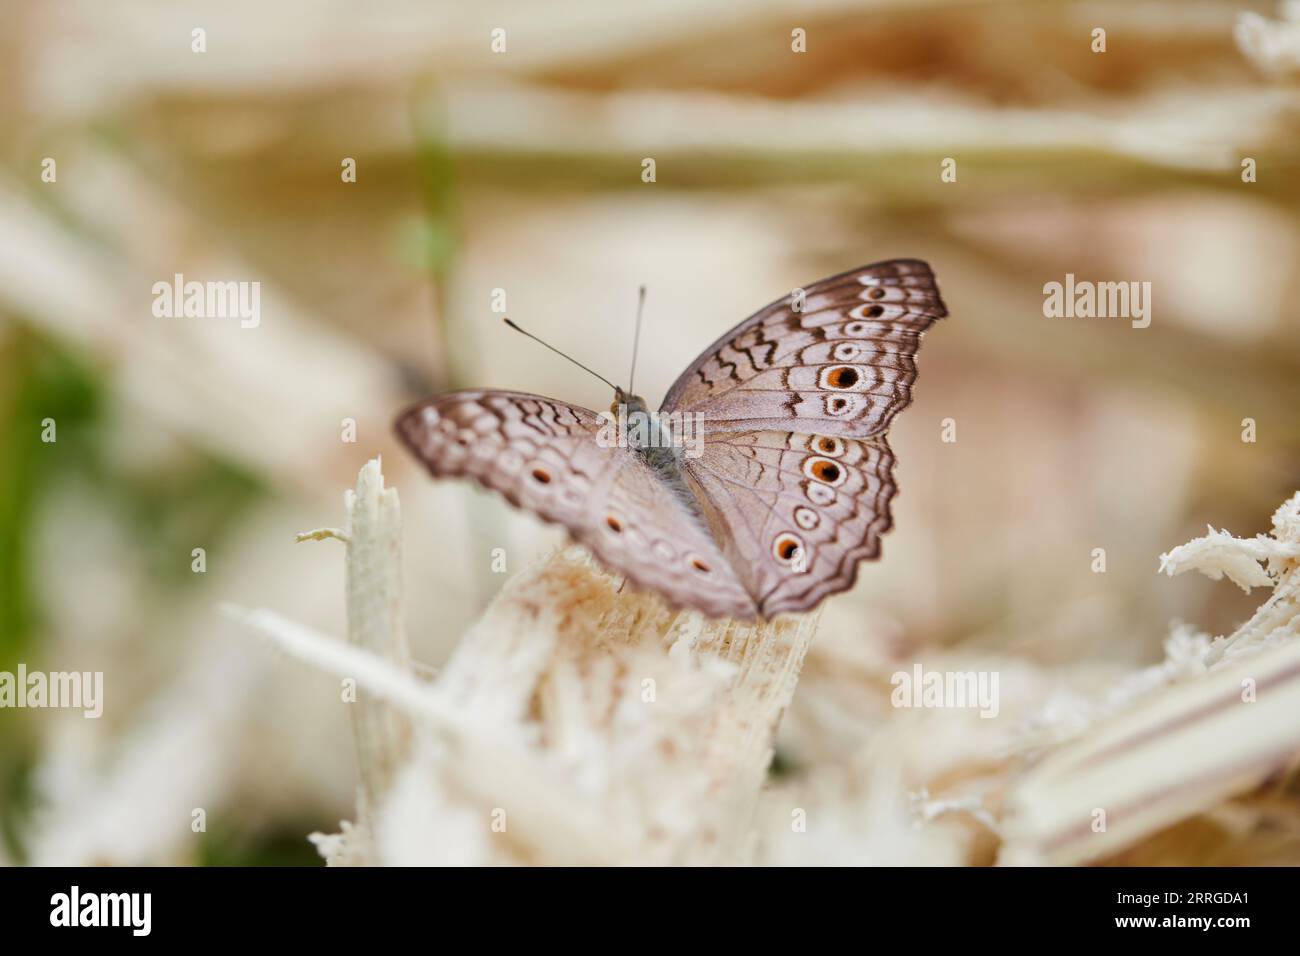 Close-up view of butterfly perching on dry straw Stock Photo